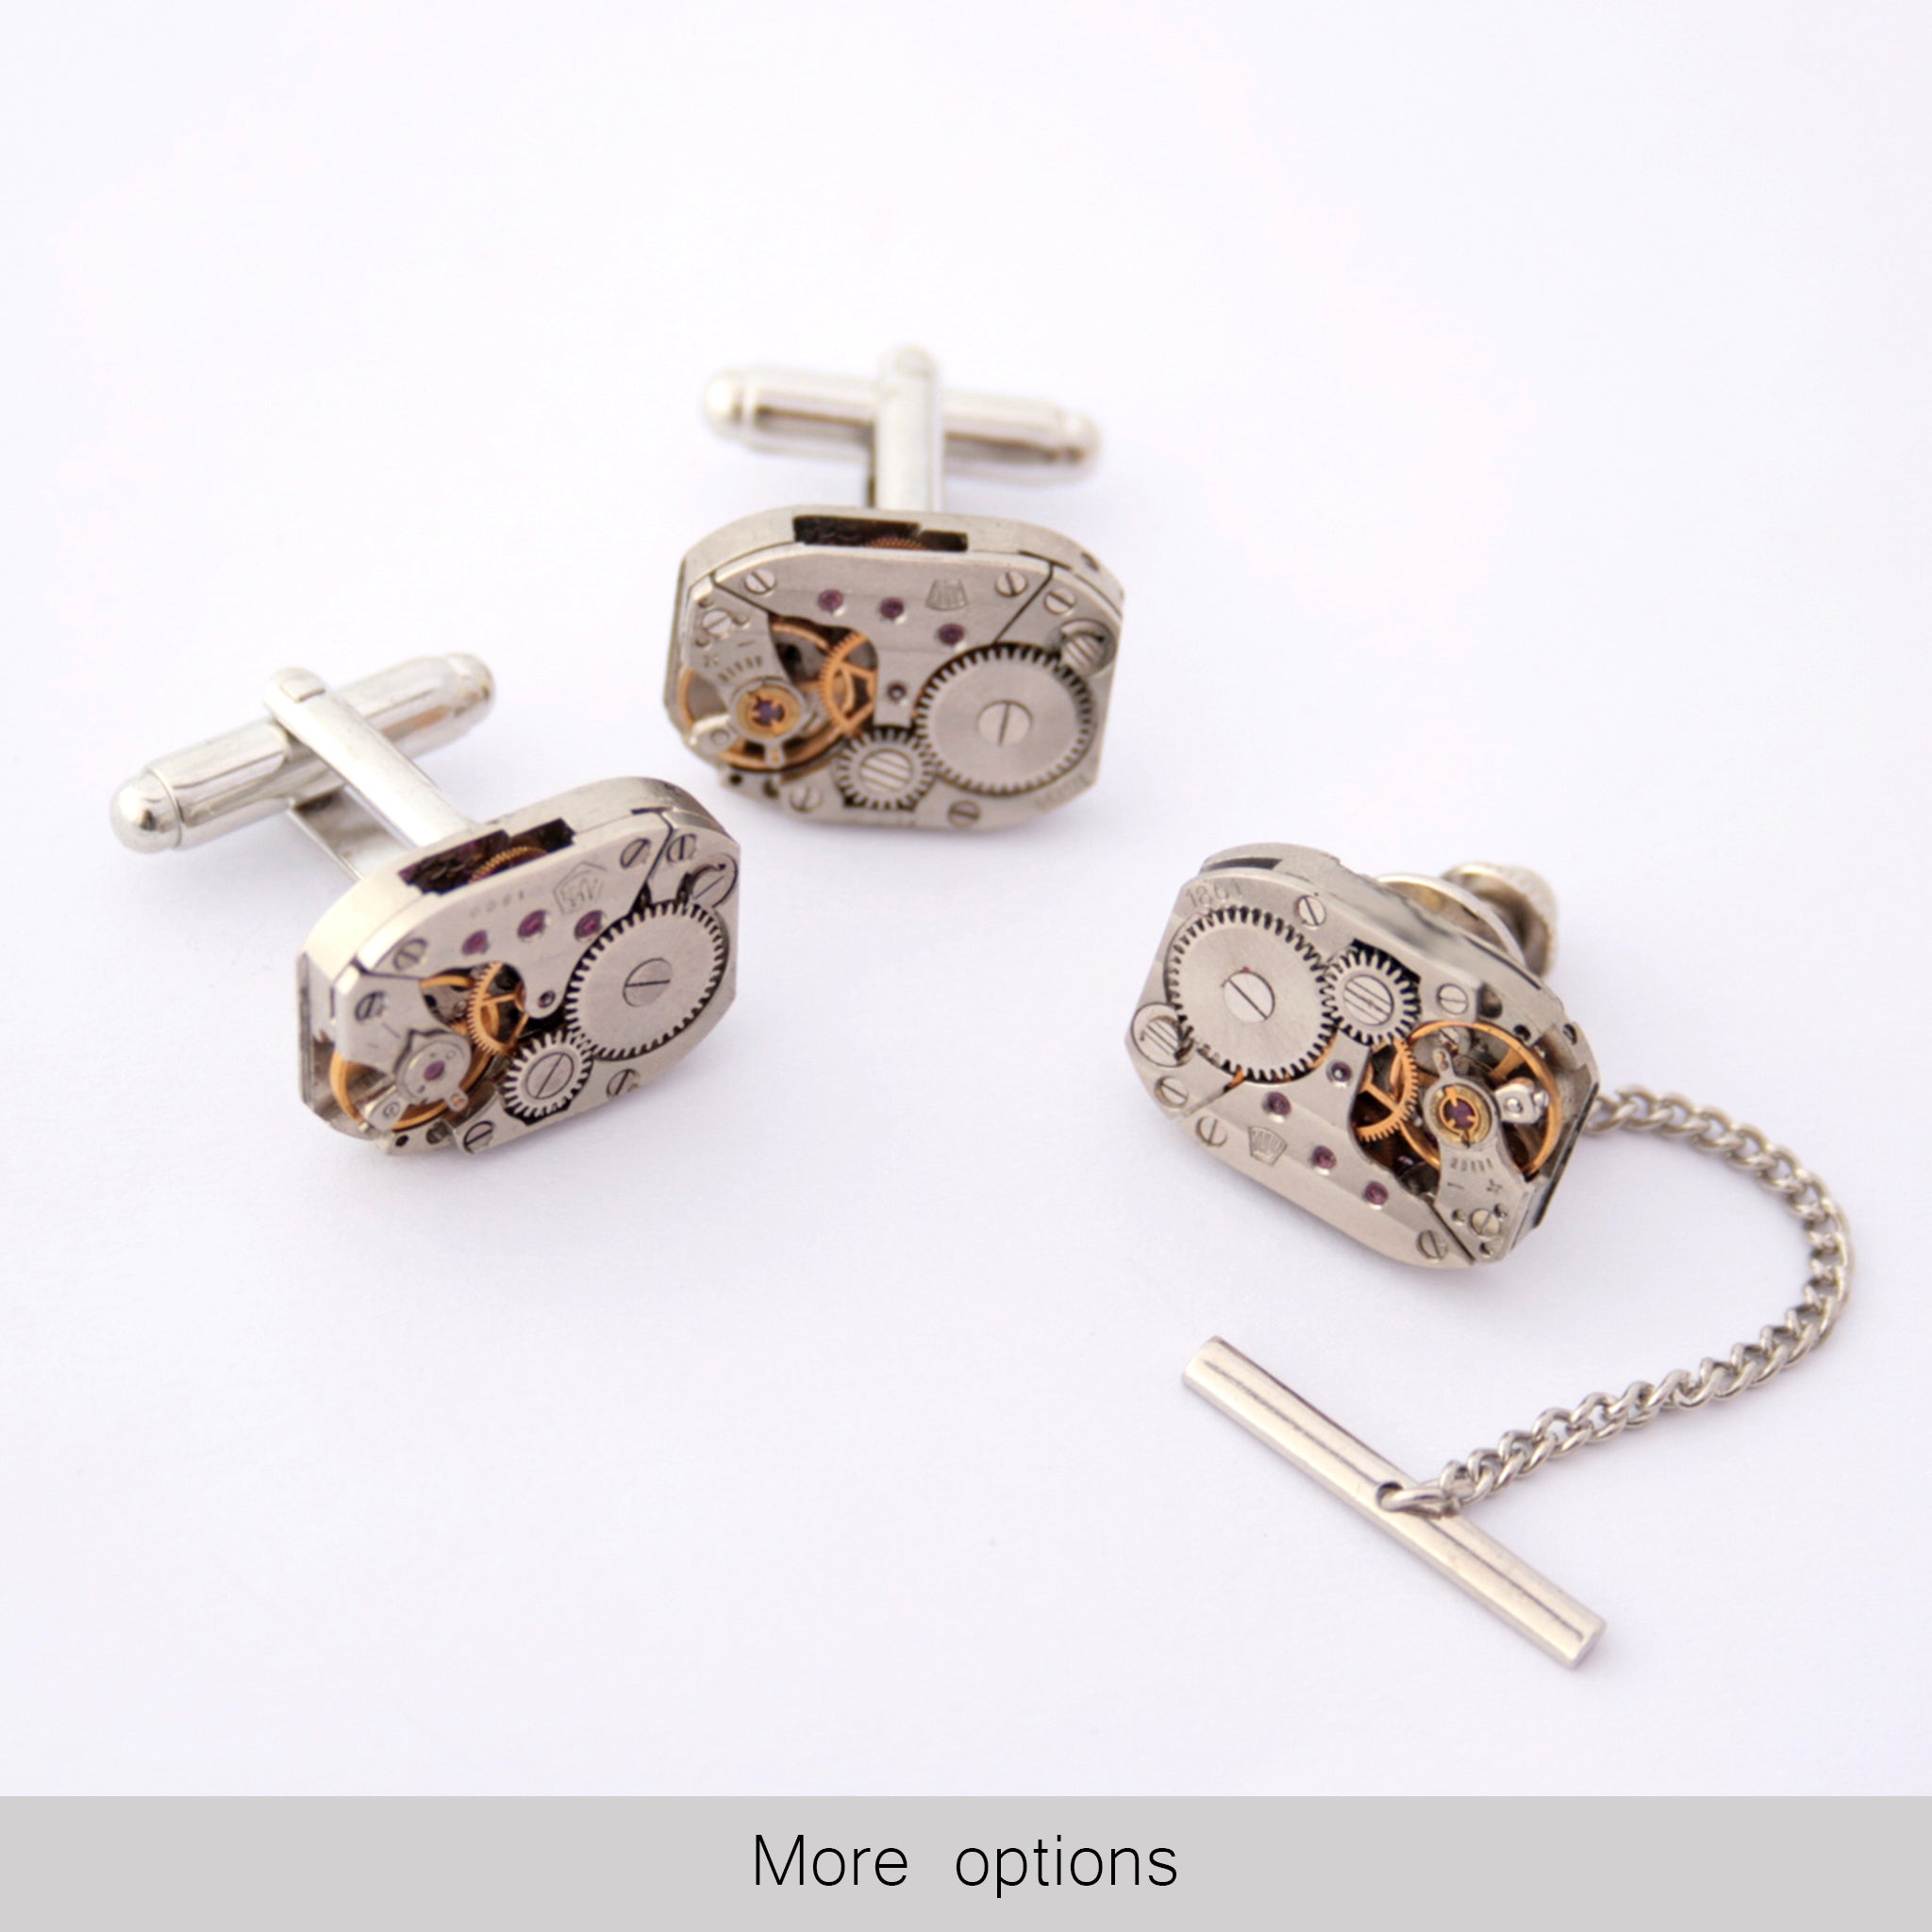 Steampunk Tie Tack and Cufflinks Set made of watch movements